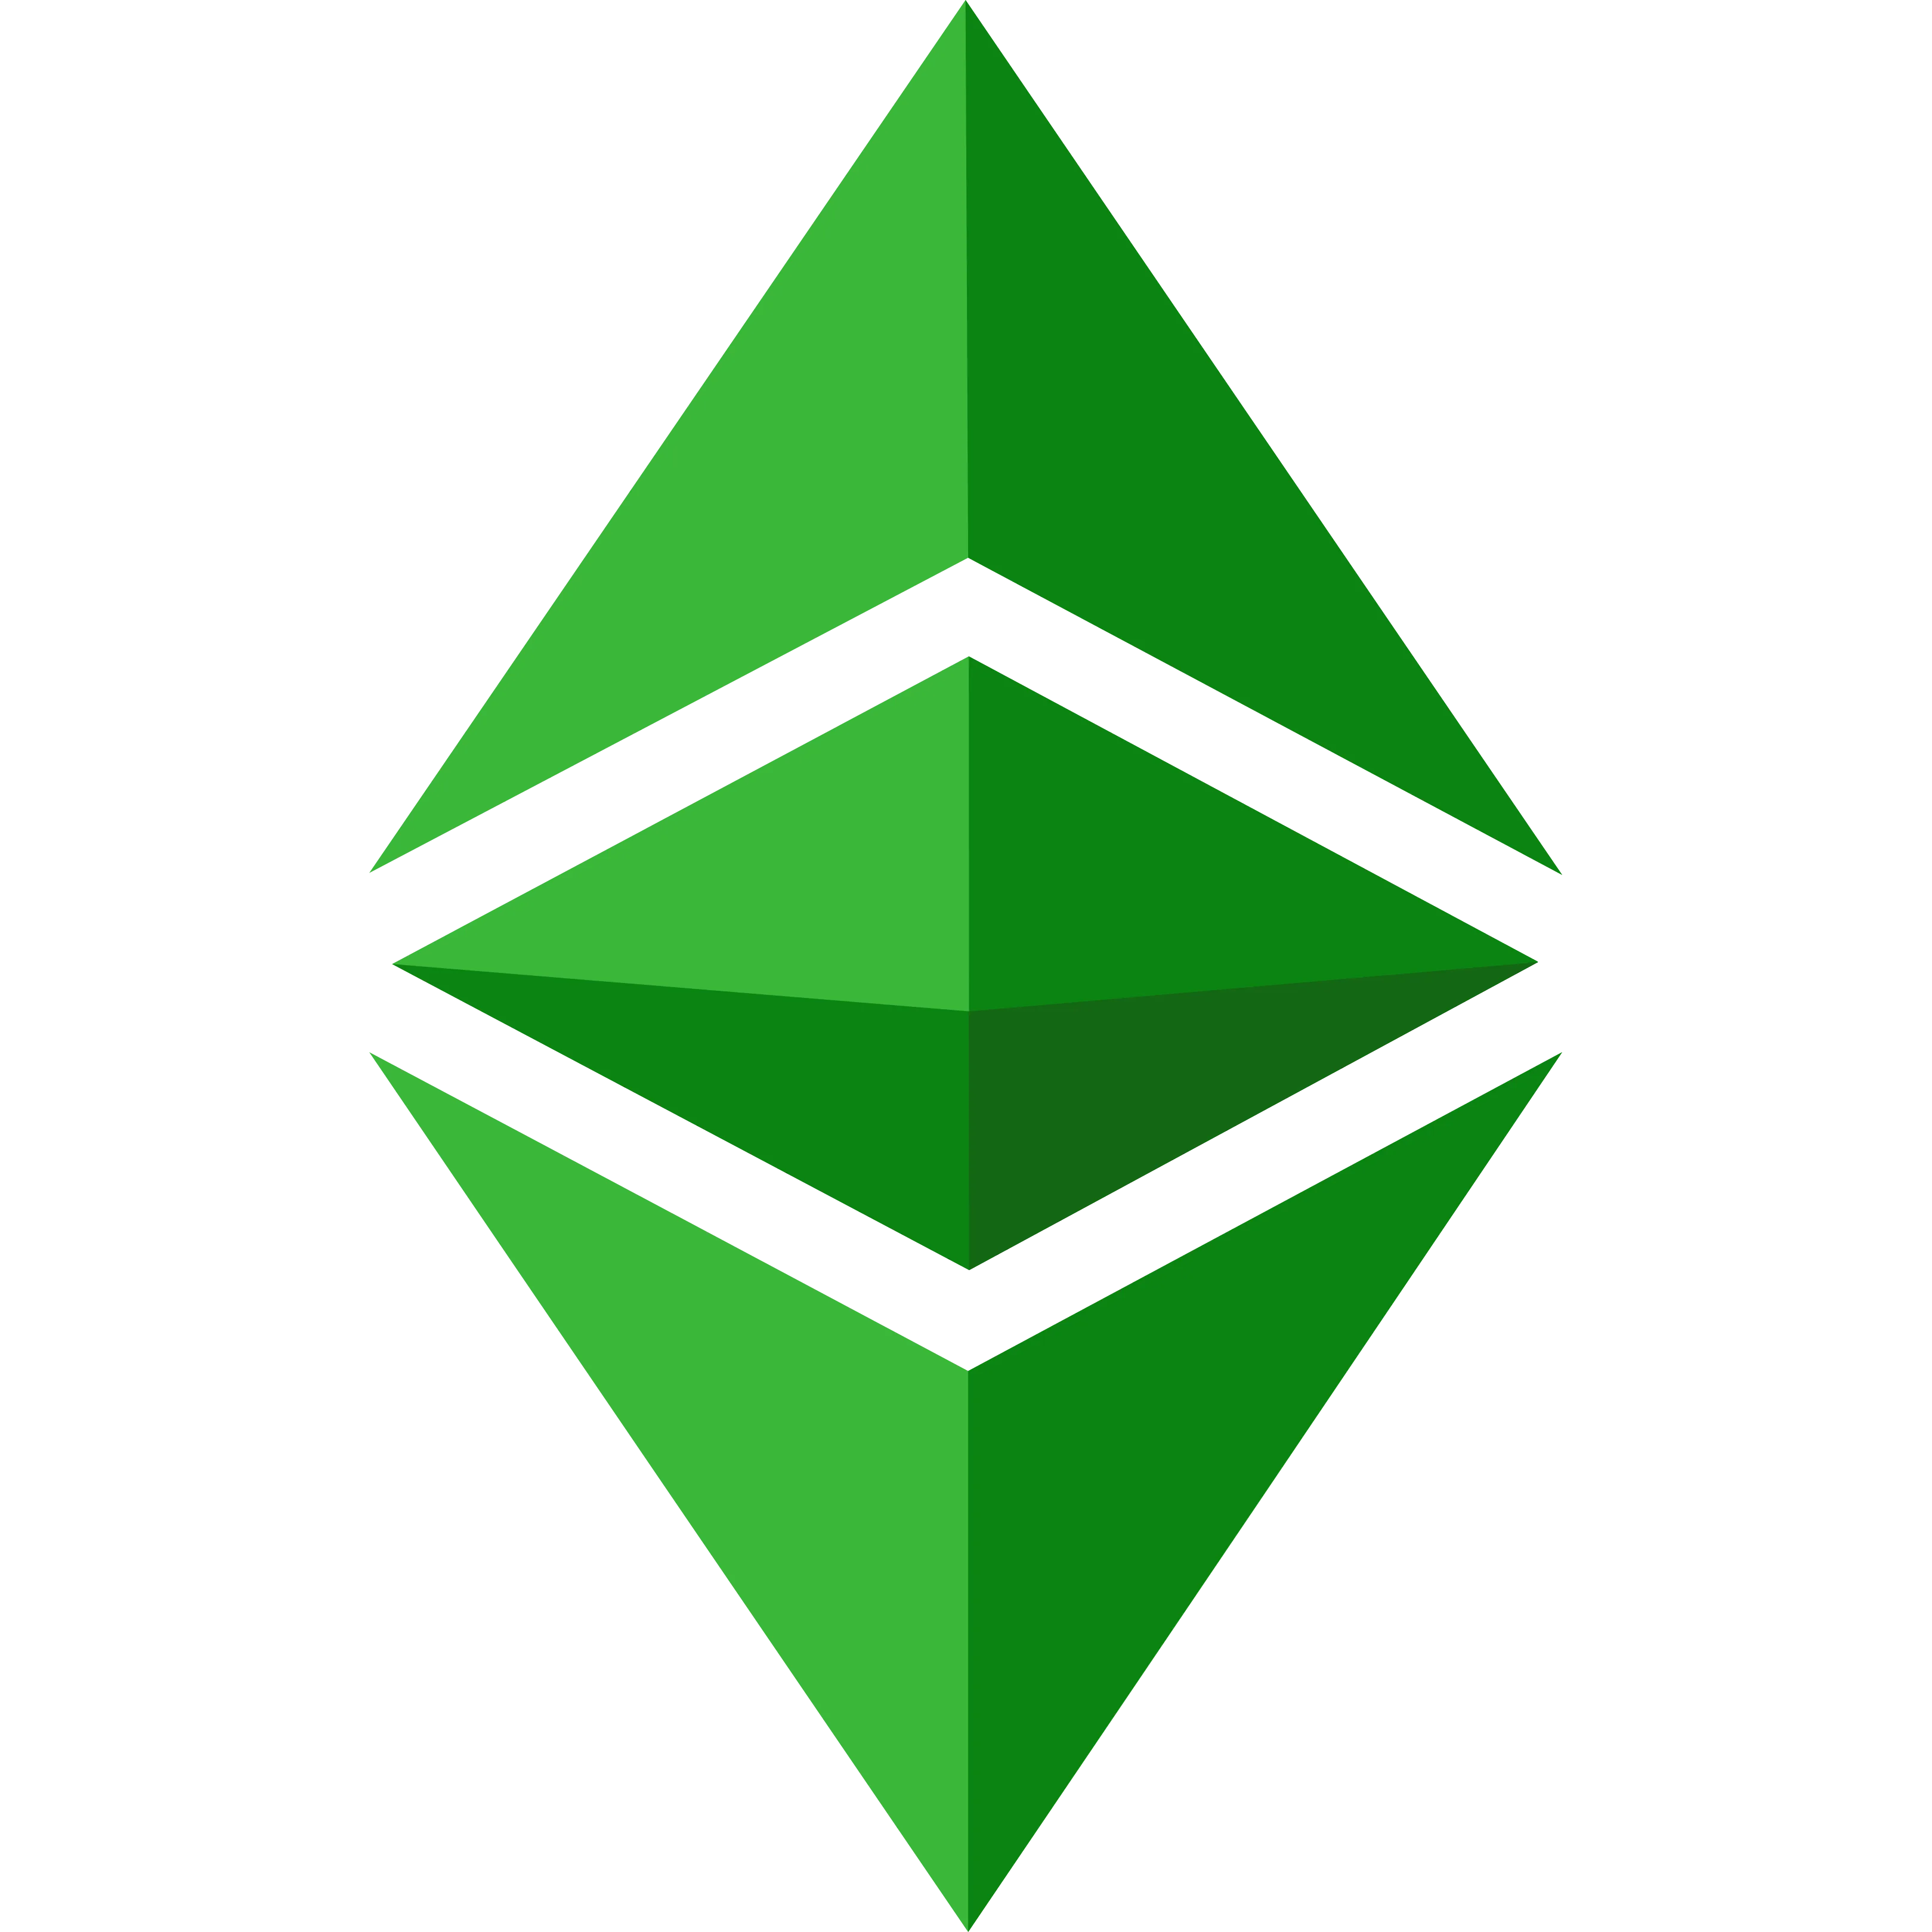 Ethereum Classic logo in png format